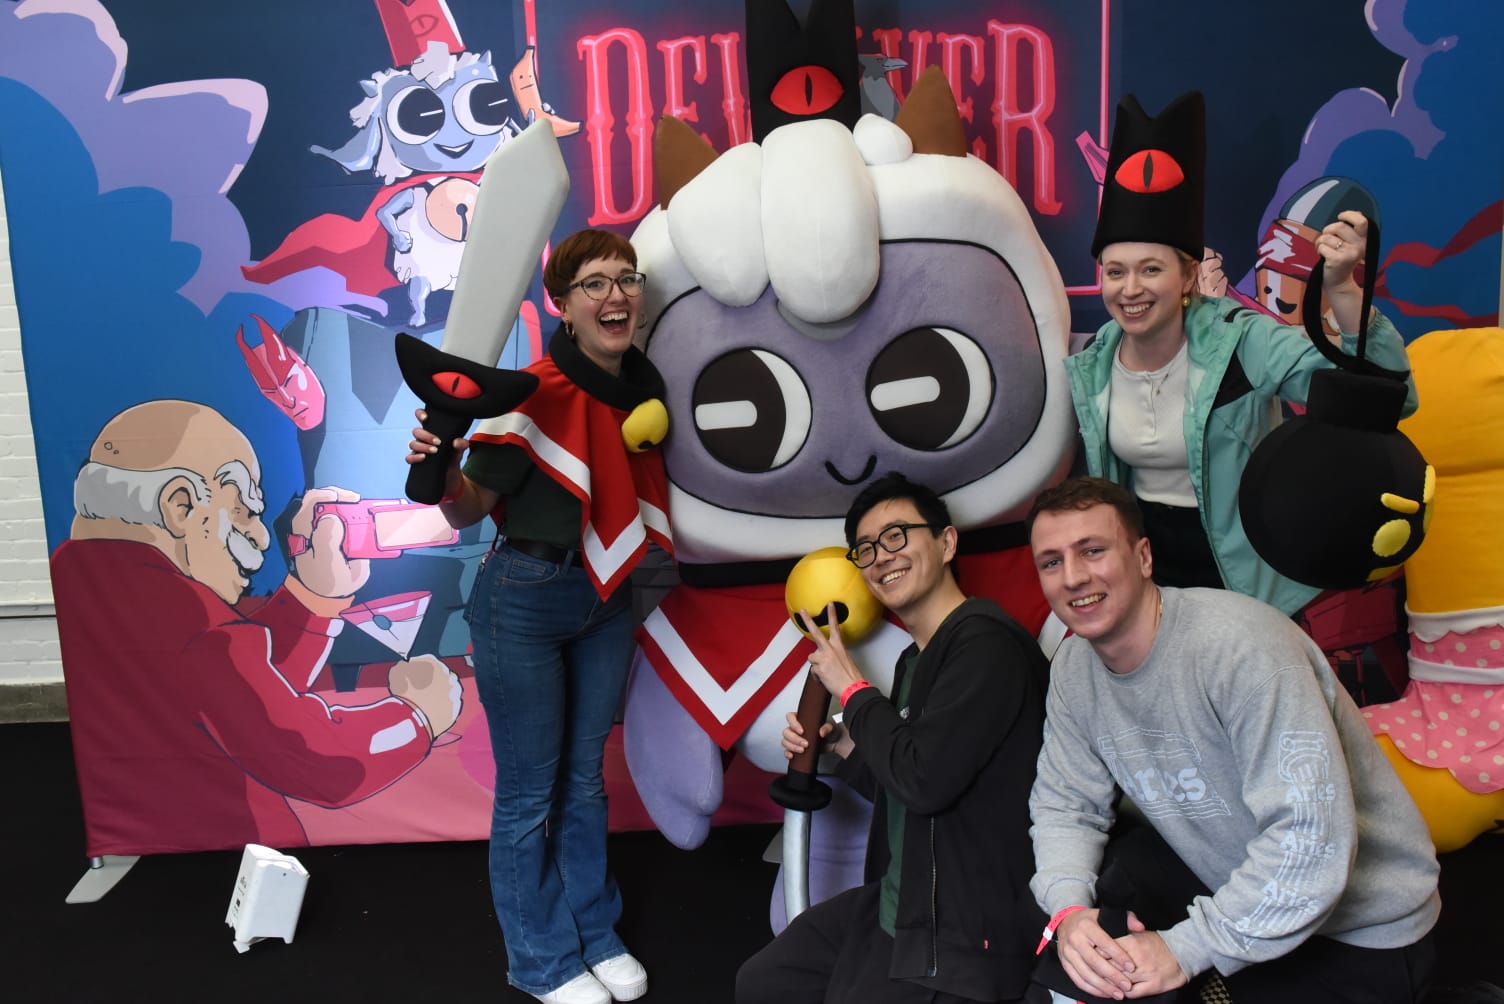 The Ukie Education team make friends with The Lamb at the Devolver Digital stand at WASD in March 2023